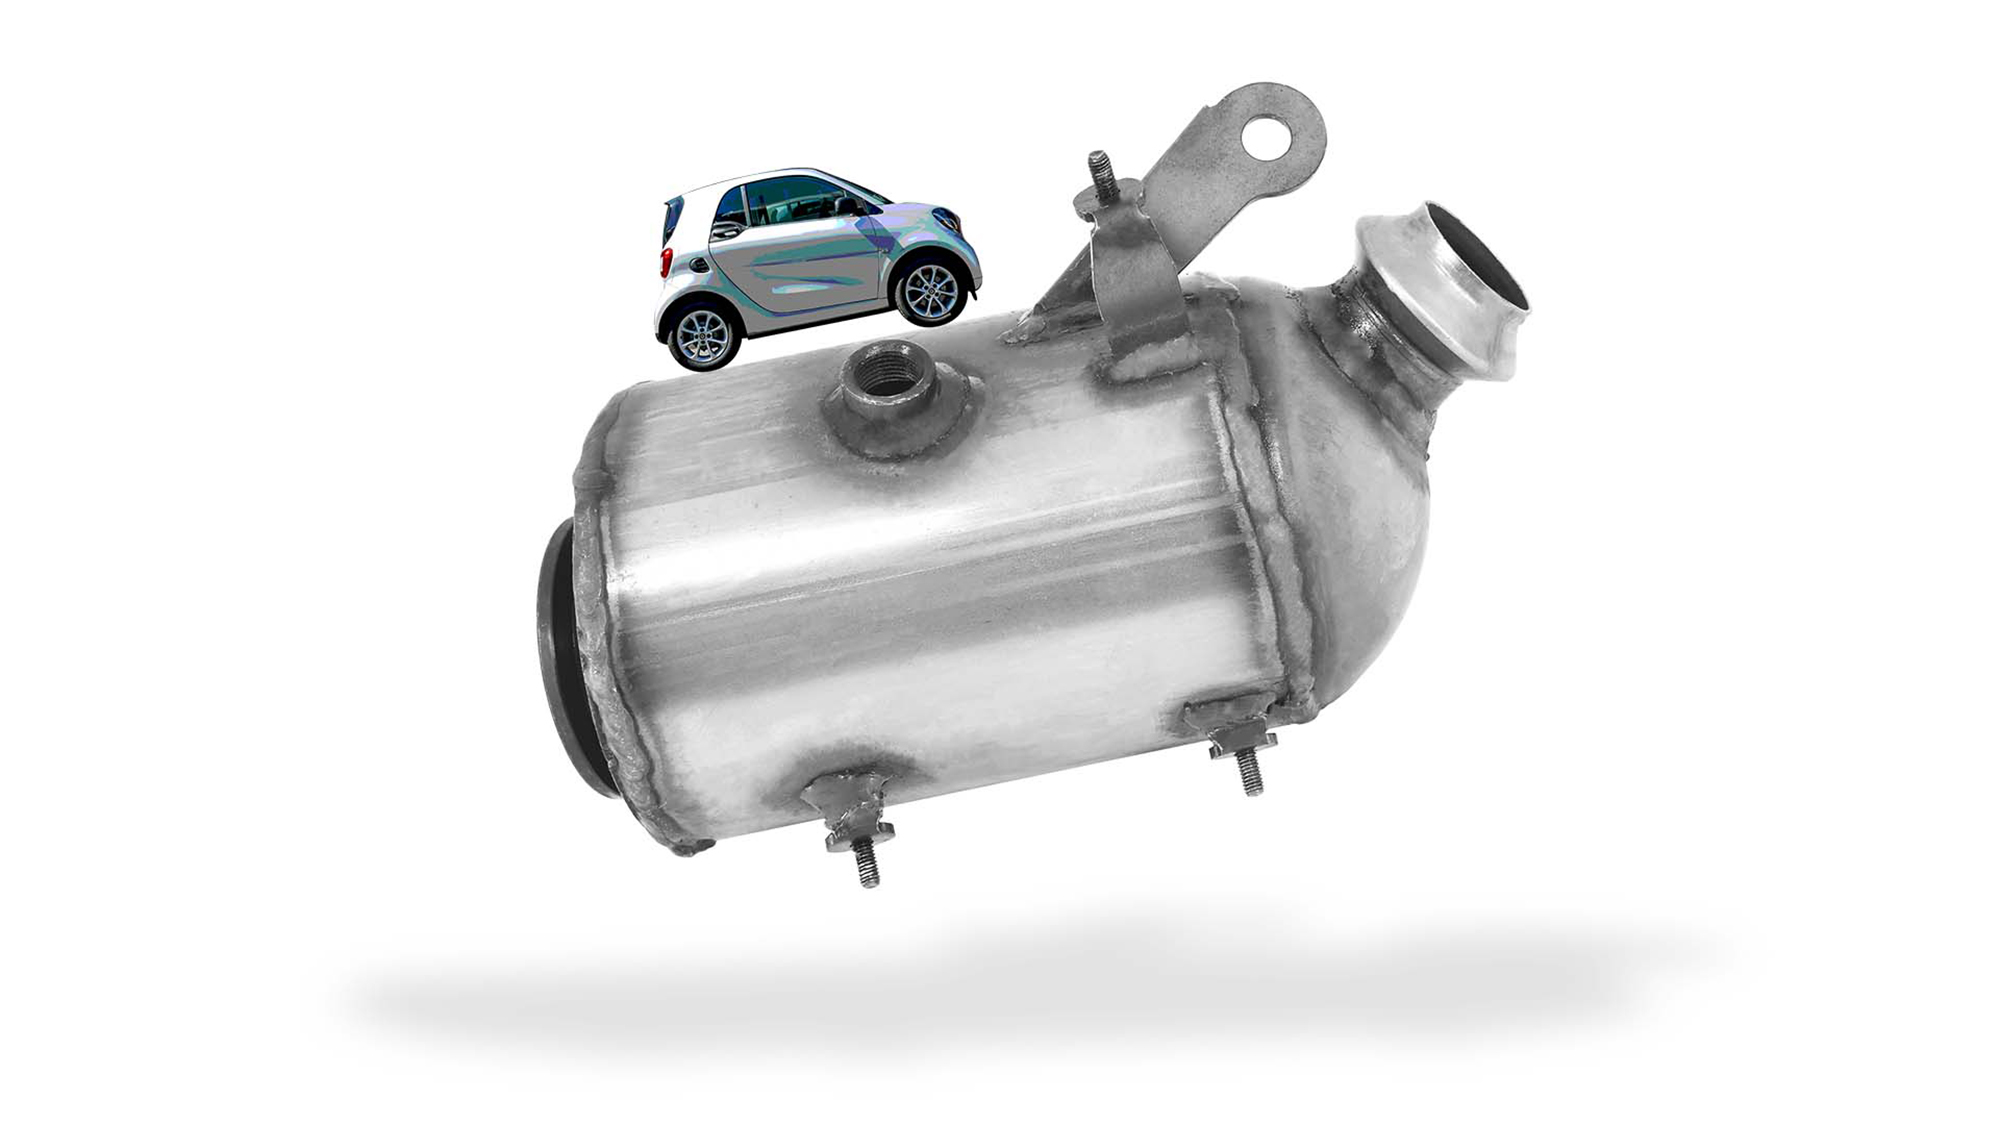 Klarius has added 30 new aftermarket parts to its range, including CATs to fit the 2014 onwards Smart ForTwo 0.9 TCE